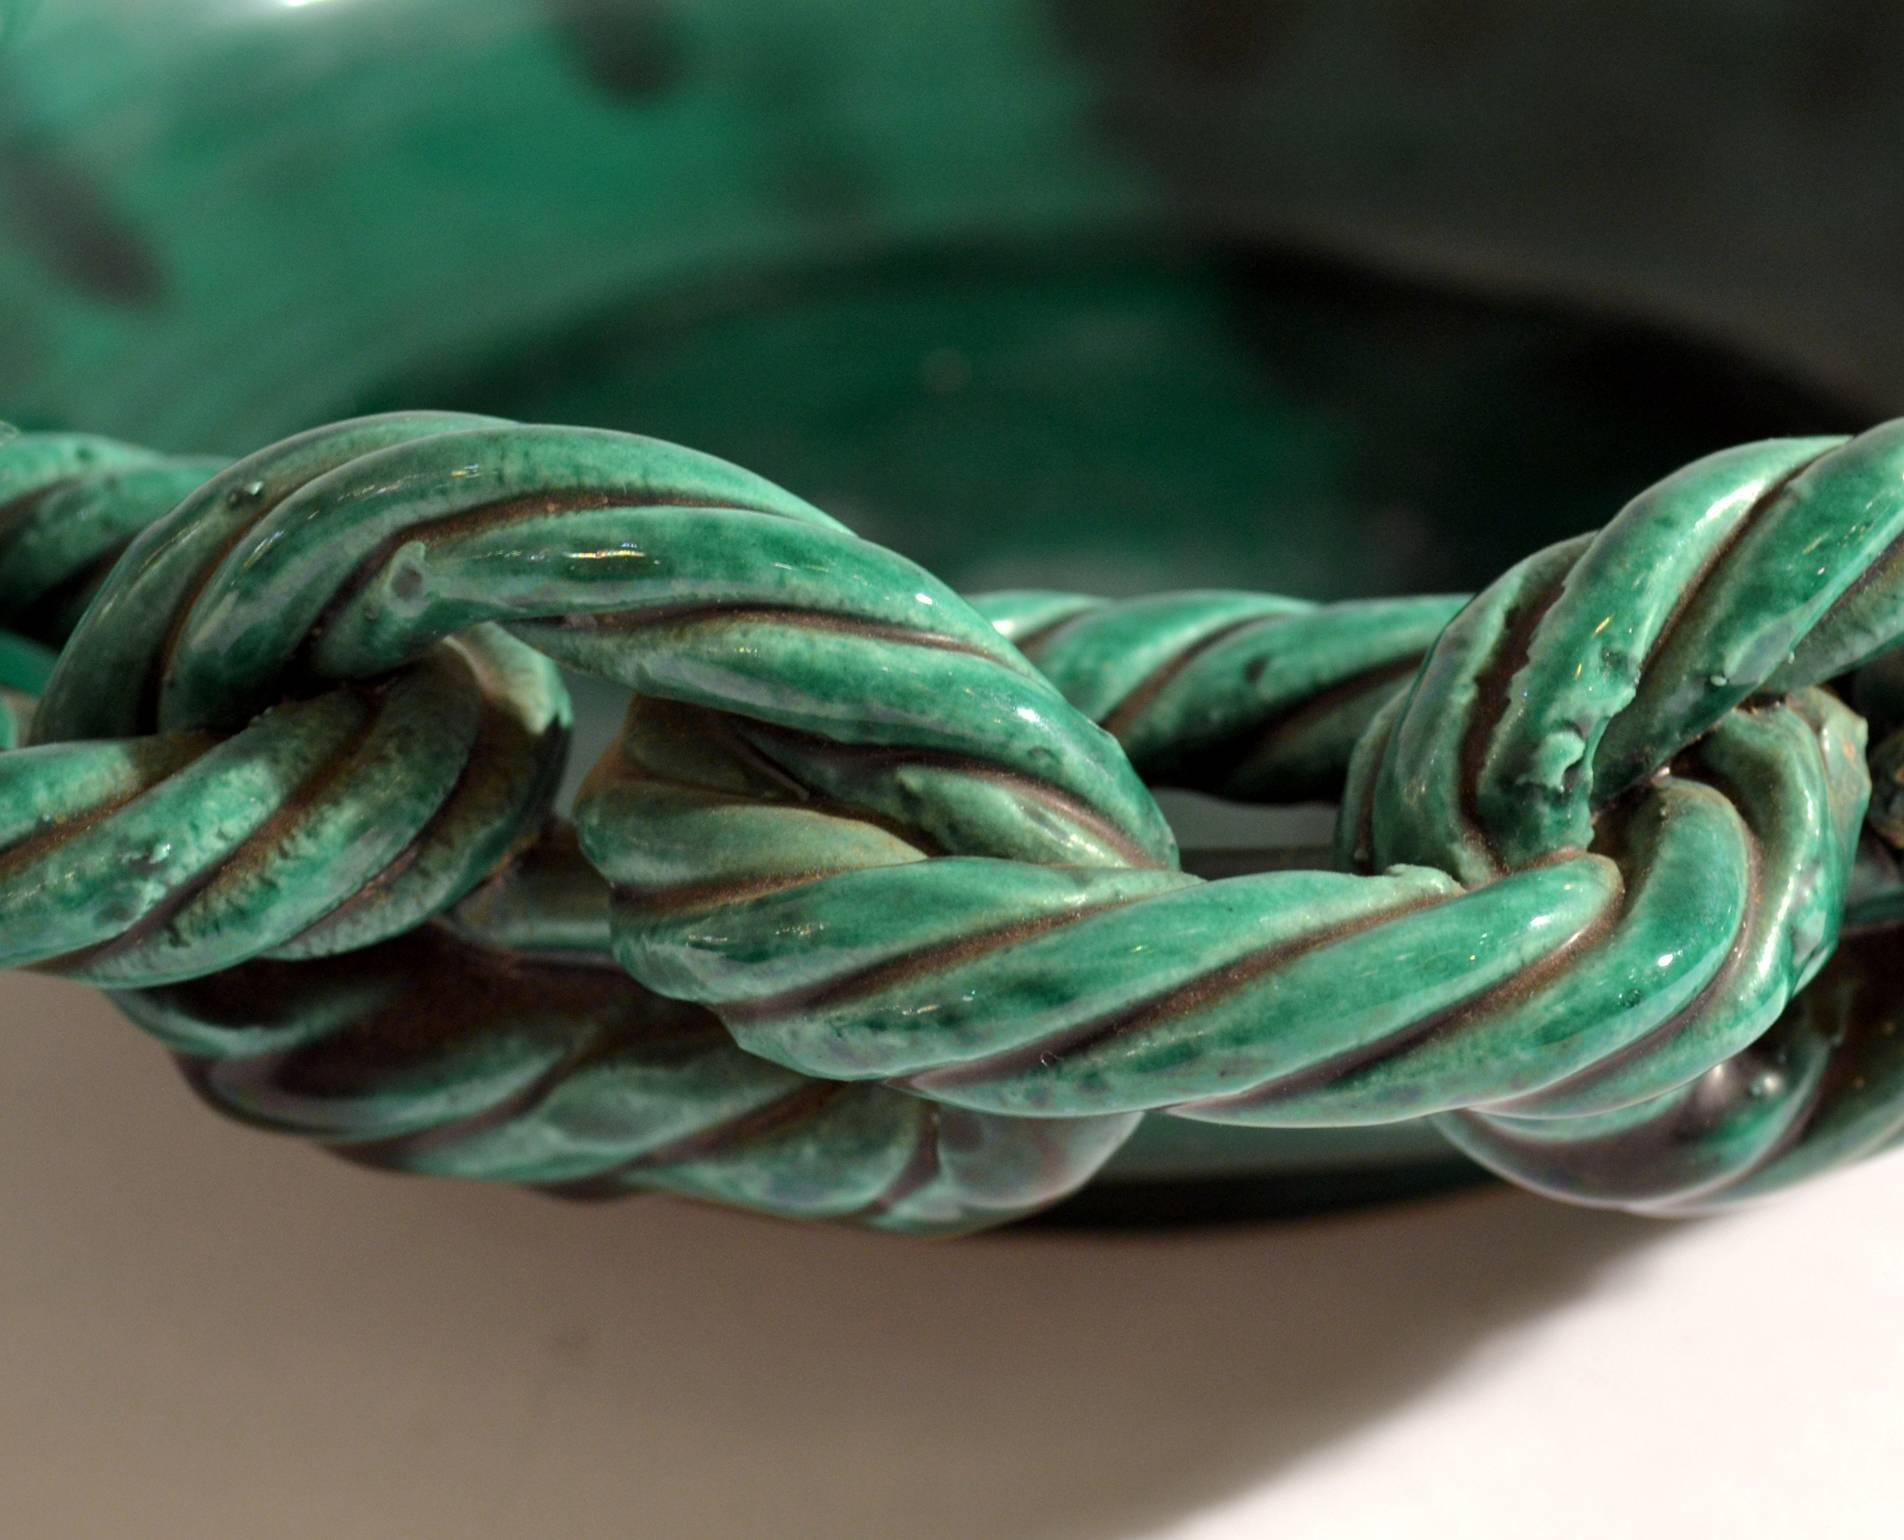 Hand formed emerald green glazed, French, 1950s fruit bowl signed Vallauris, decorated with a ceramic rope chain around the edge.
There are several models available, See image 8-10.